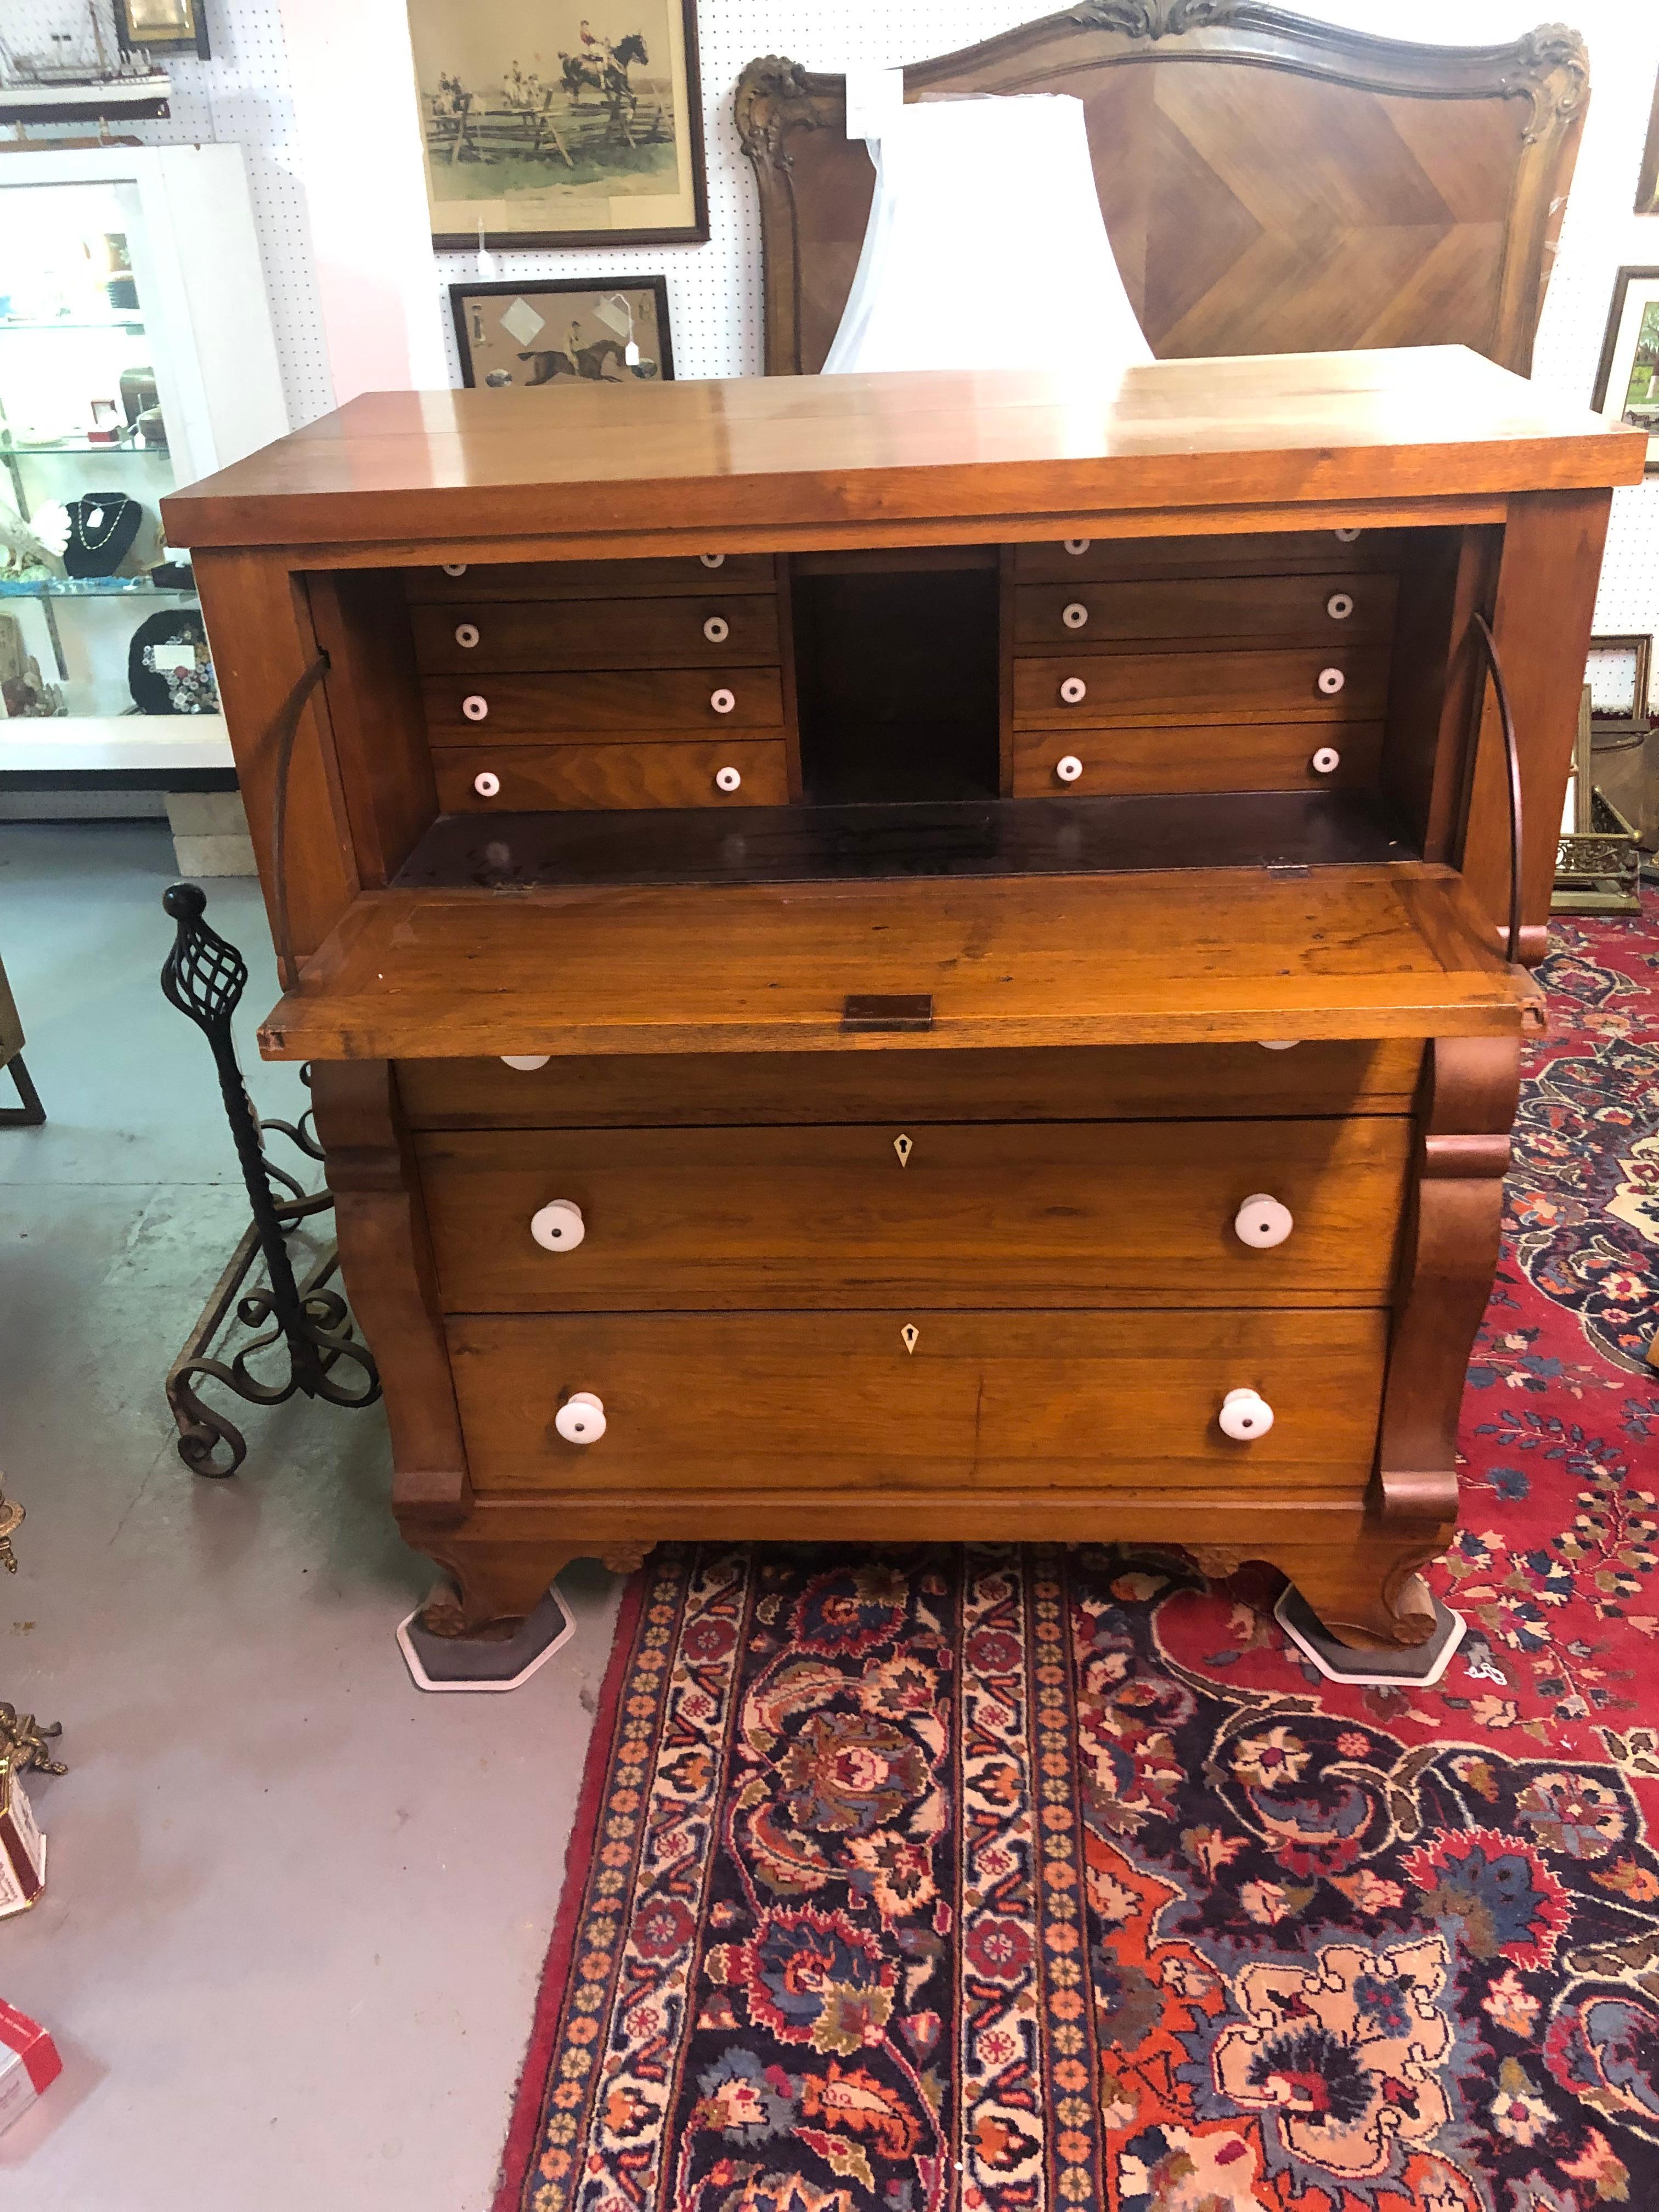 Handsome 19th century butler's secretary signed and dated by Ja. B. Metz, Norrisville PA 1880. Made in the master craftsman tradition having hand cut dovetail joinery, bone escutcheons, original porcelain knobs, pull down desk with 8 little drawers,